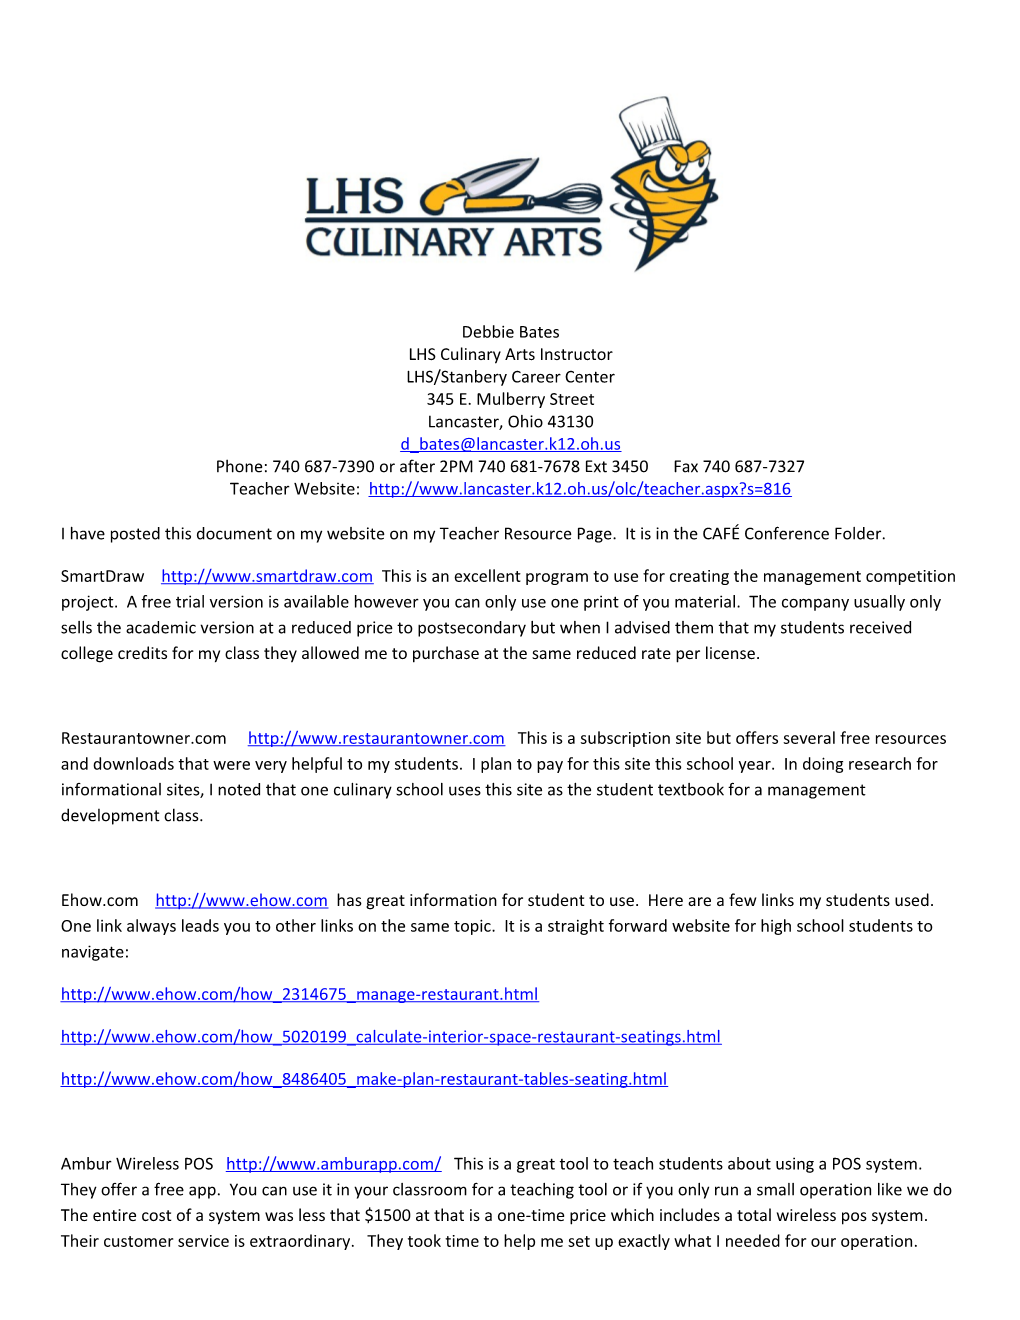 LHS Culinary Arts Instructor